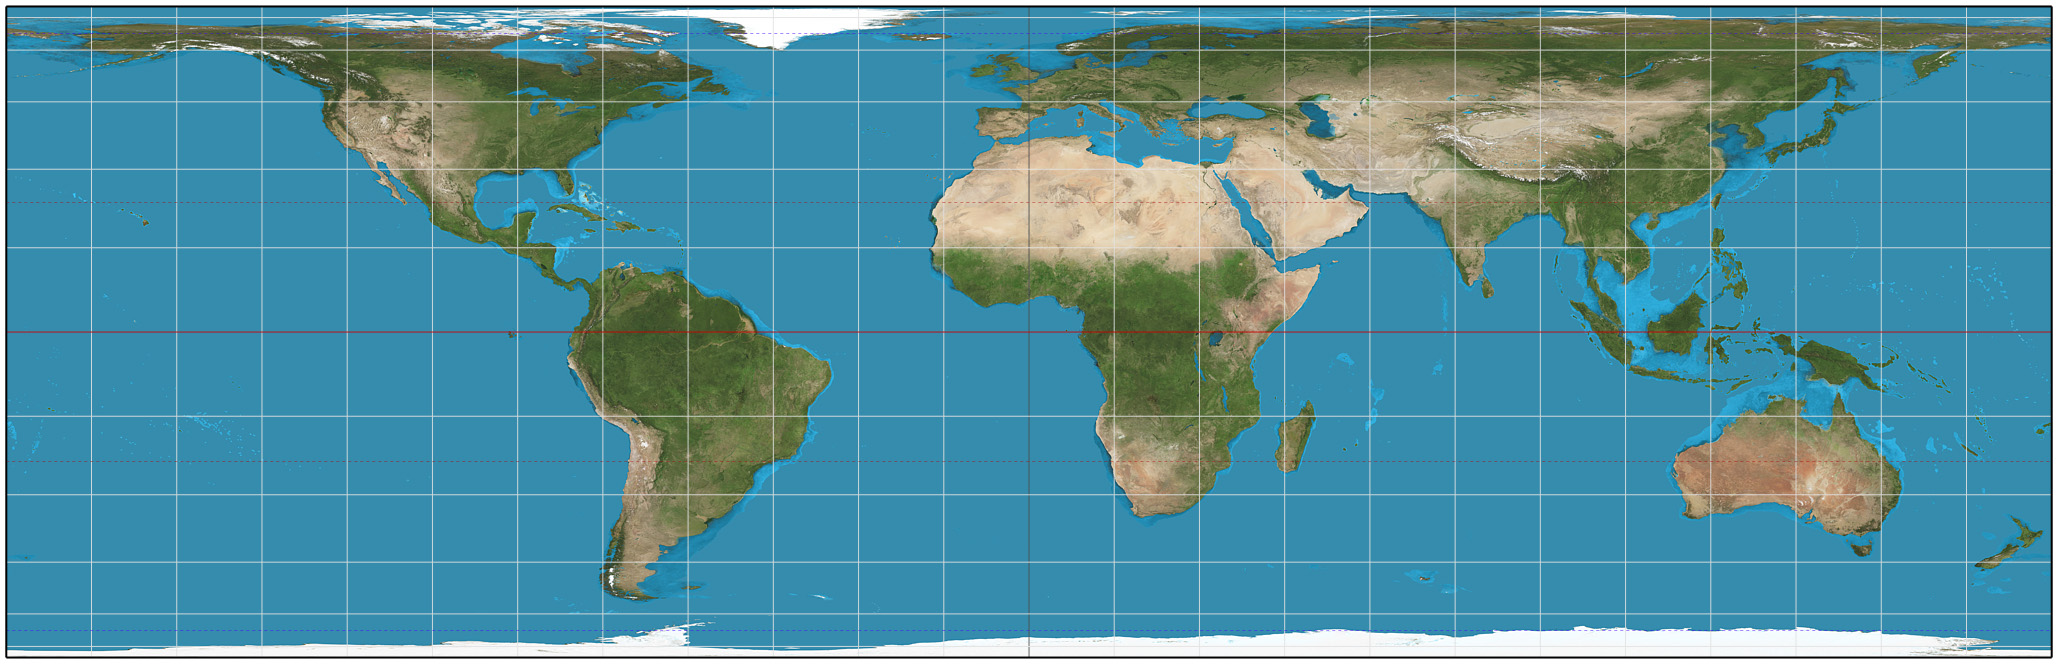 map of the world using the Lambert cylindrical equal-area projection